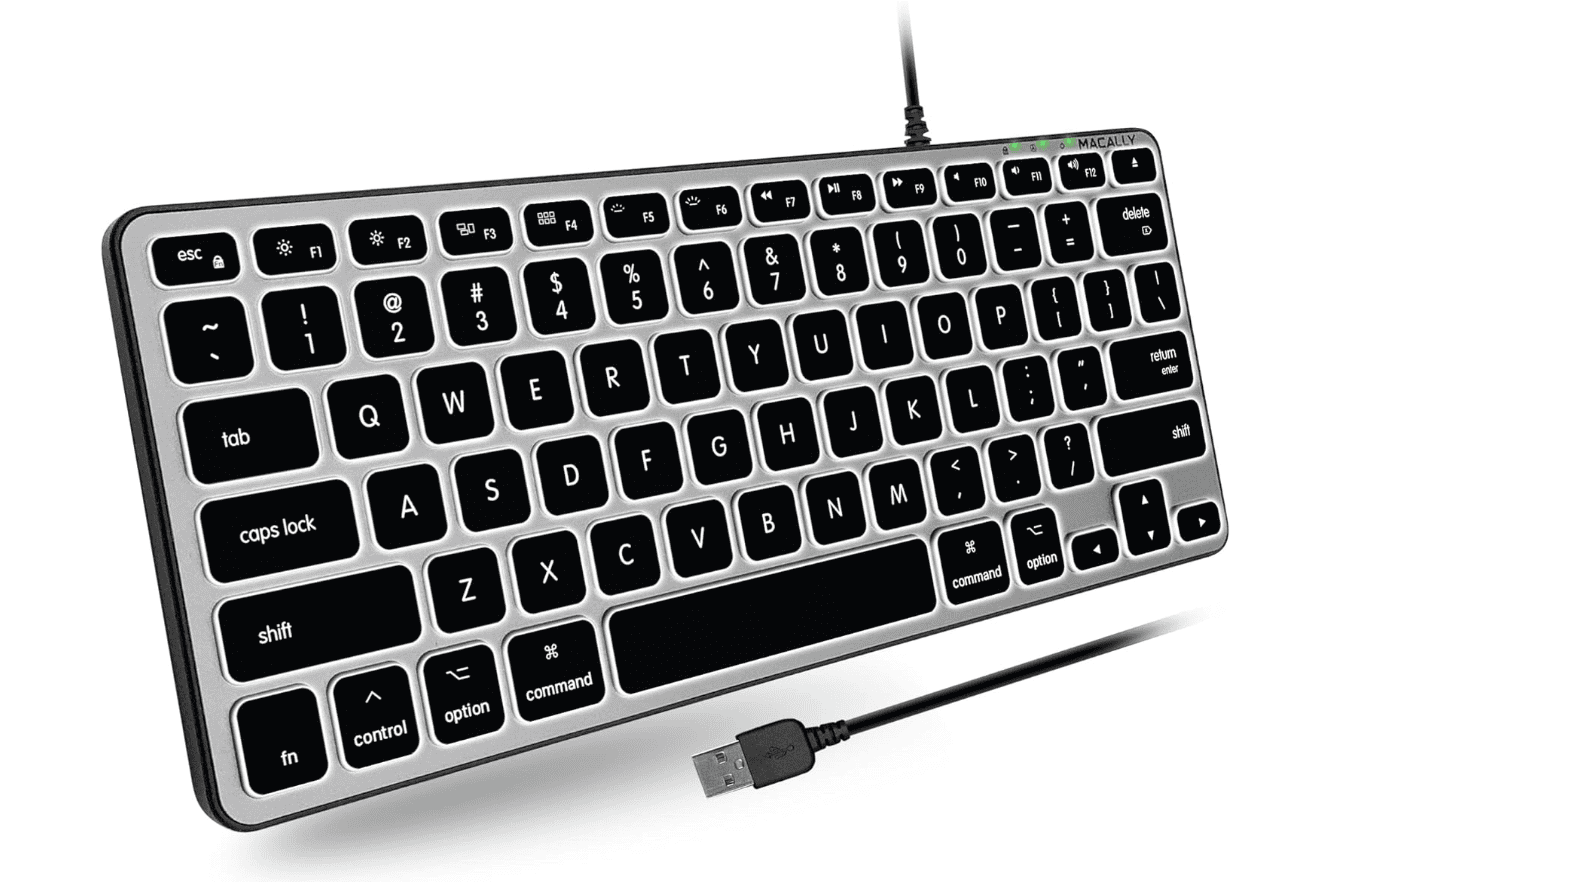 Backlit keyboard by Macally